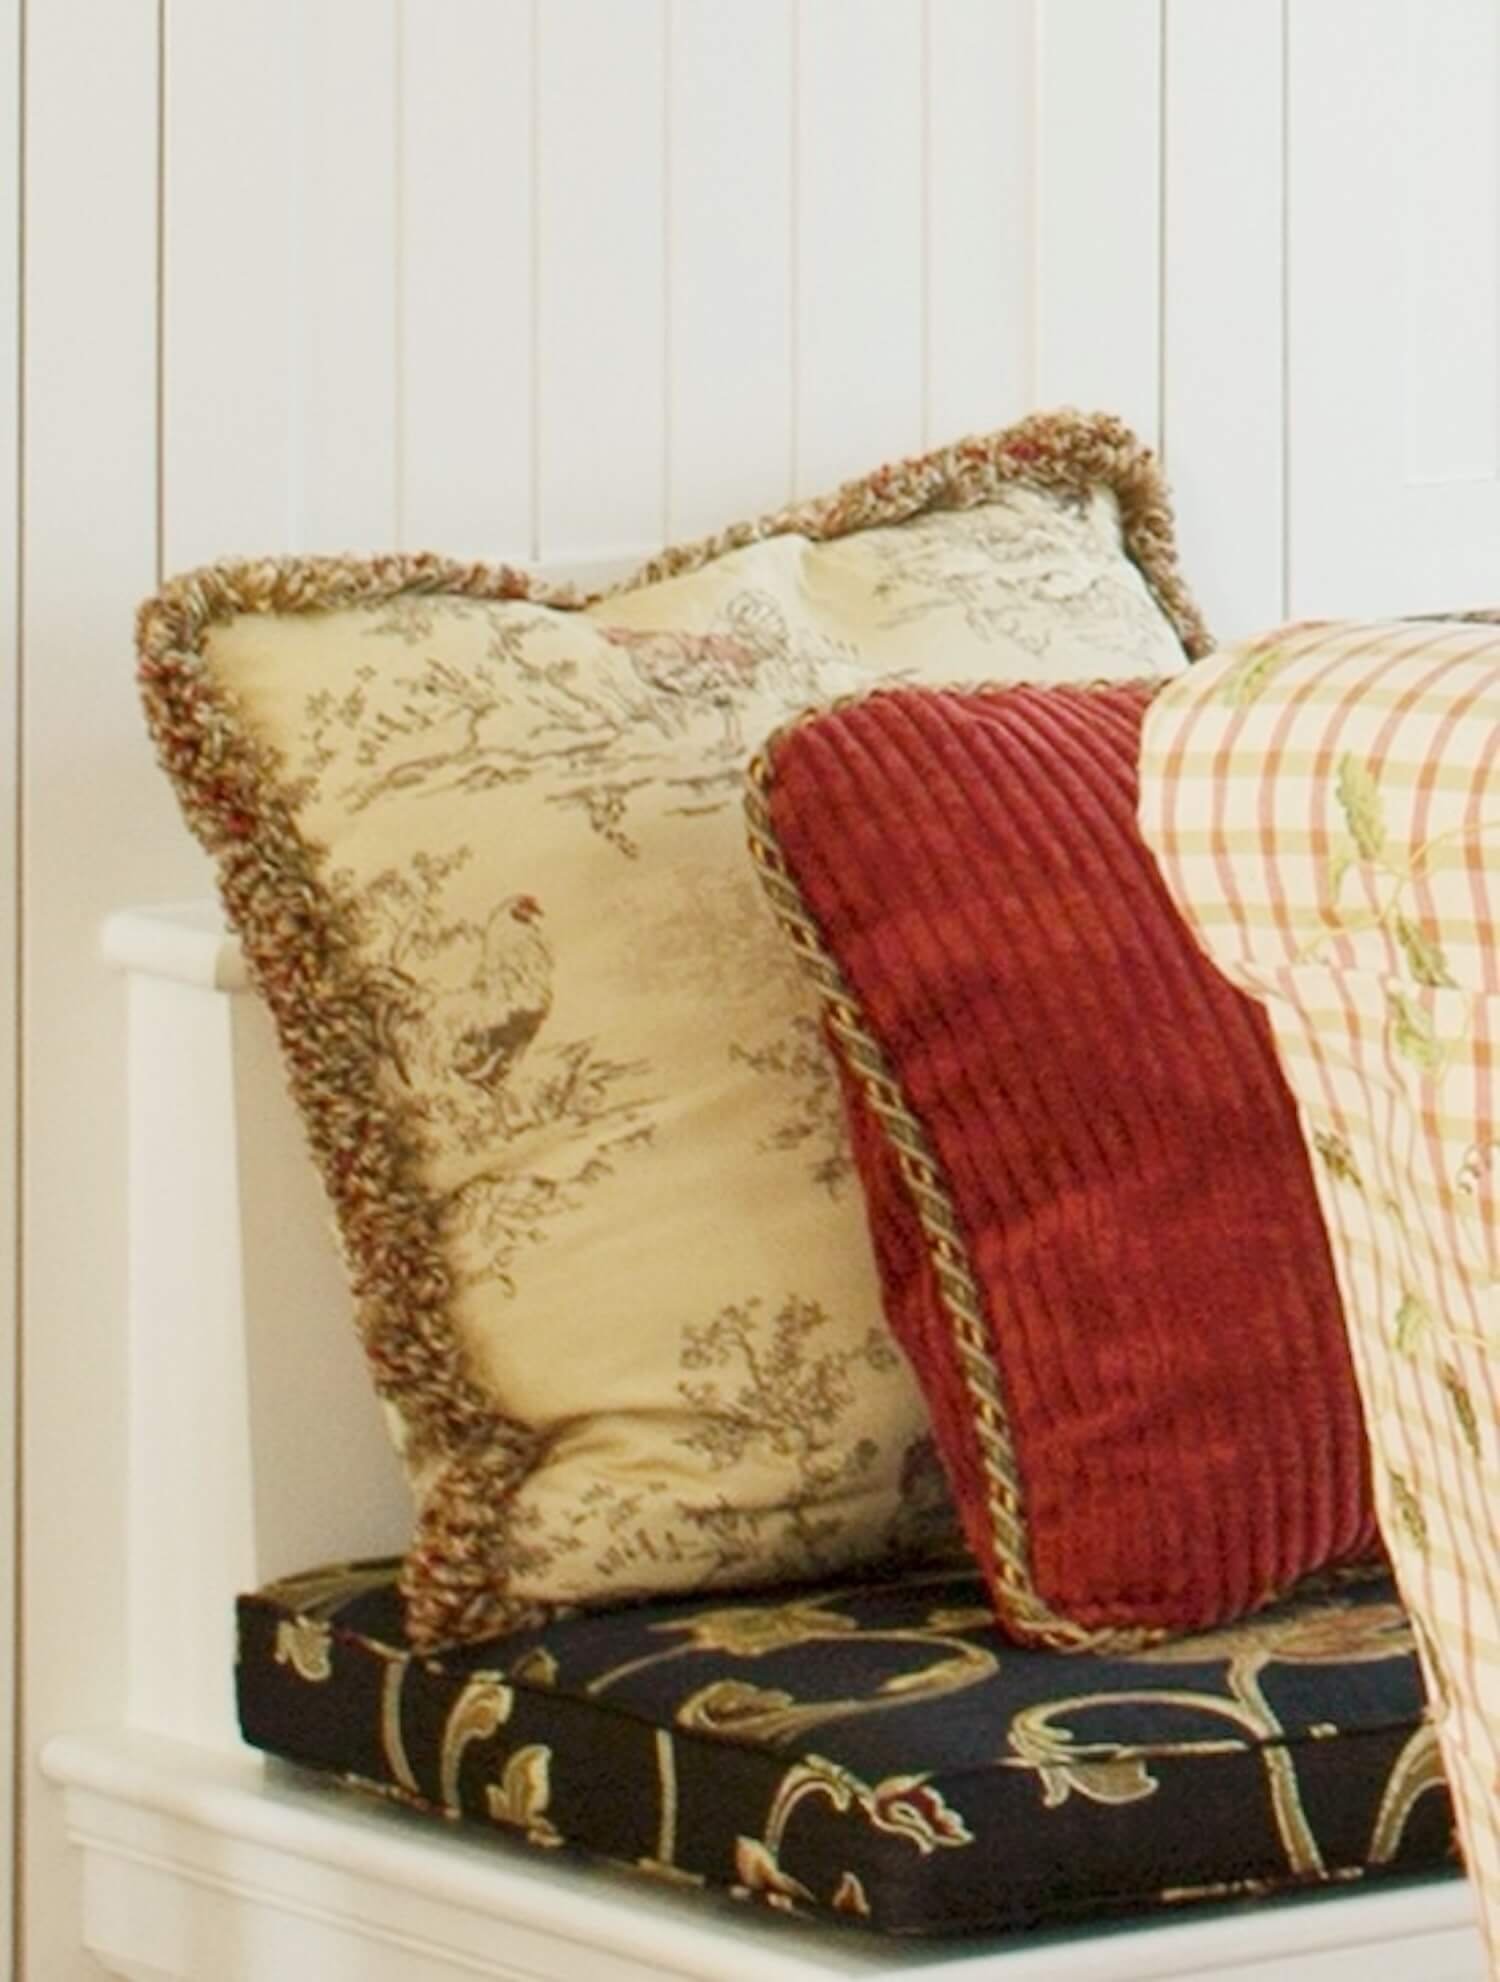 pillows with cord and loop fringe trim.JPG